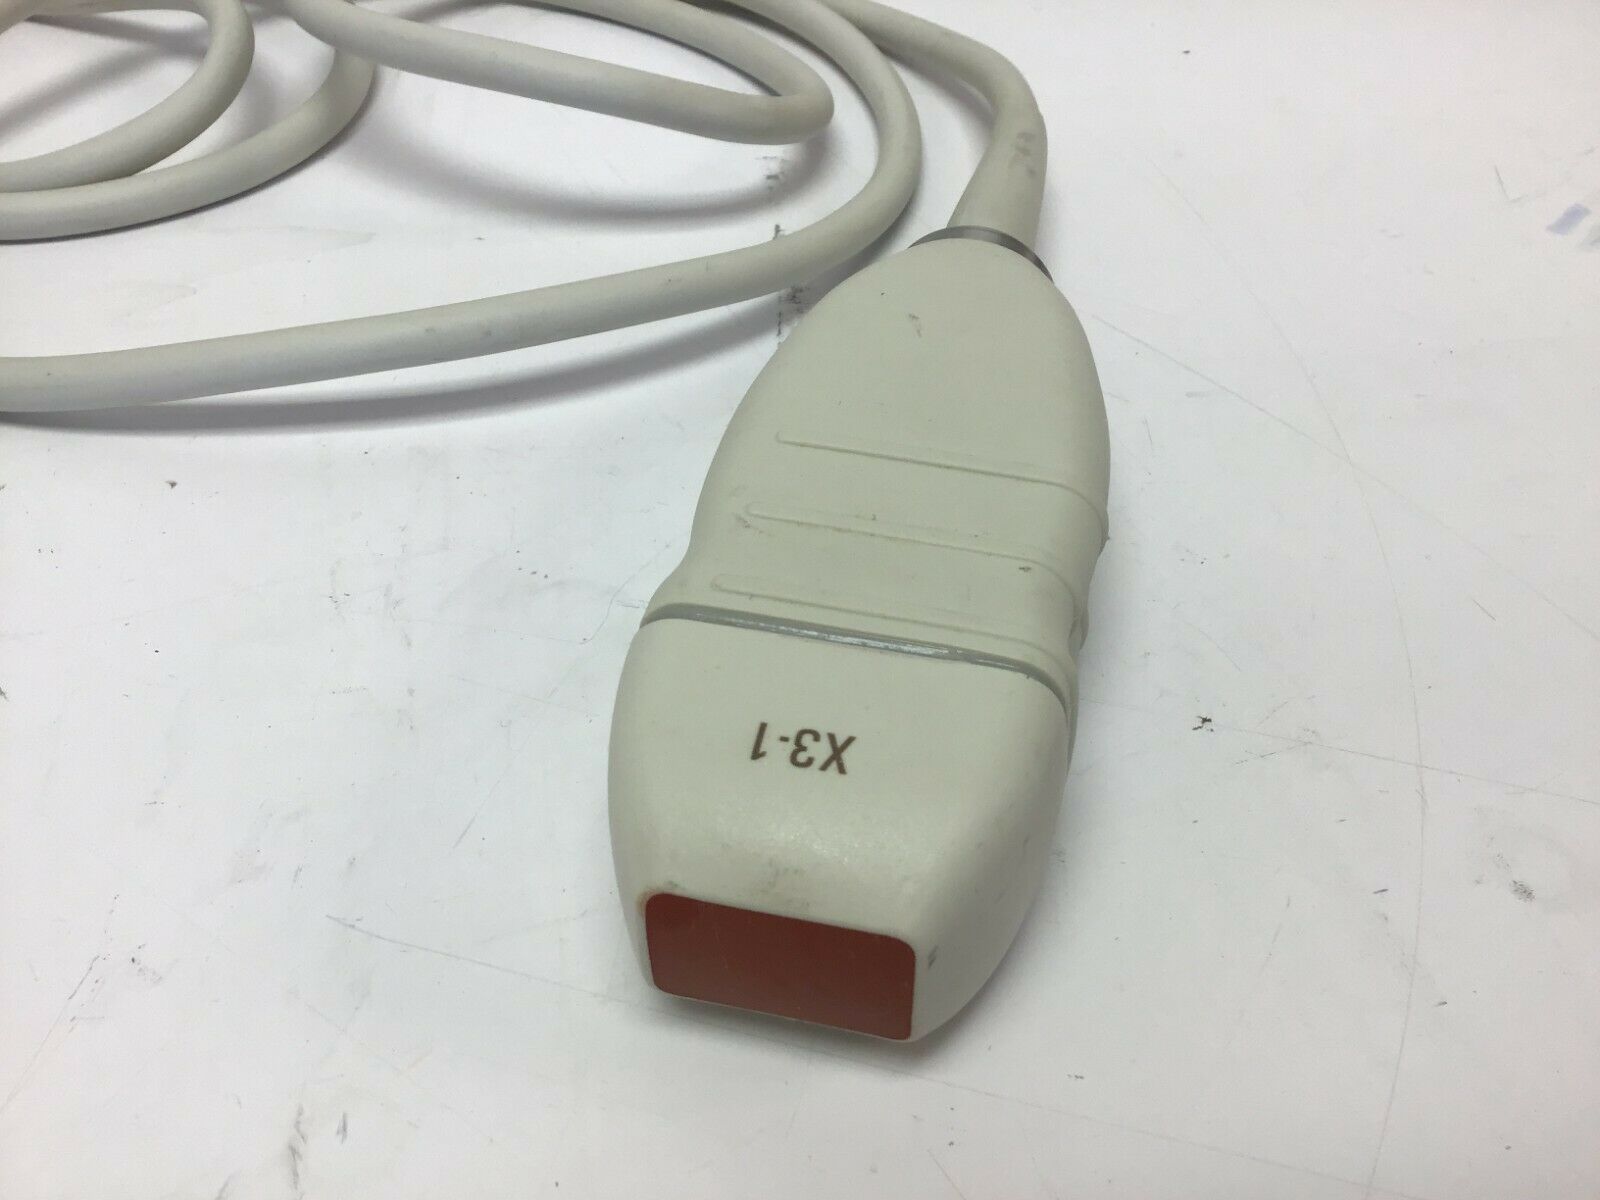 Philips X3-1 Phased Array Ultrasound Transducer Probe IPx-7 DIAGNOSTIC ULTRASOUND MACHINES FOR SALE